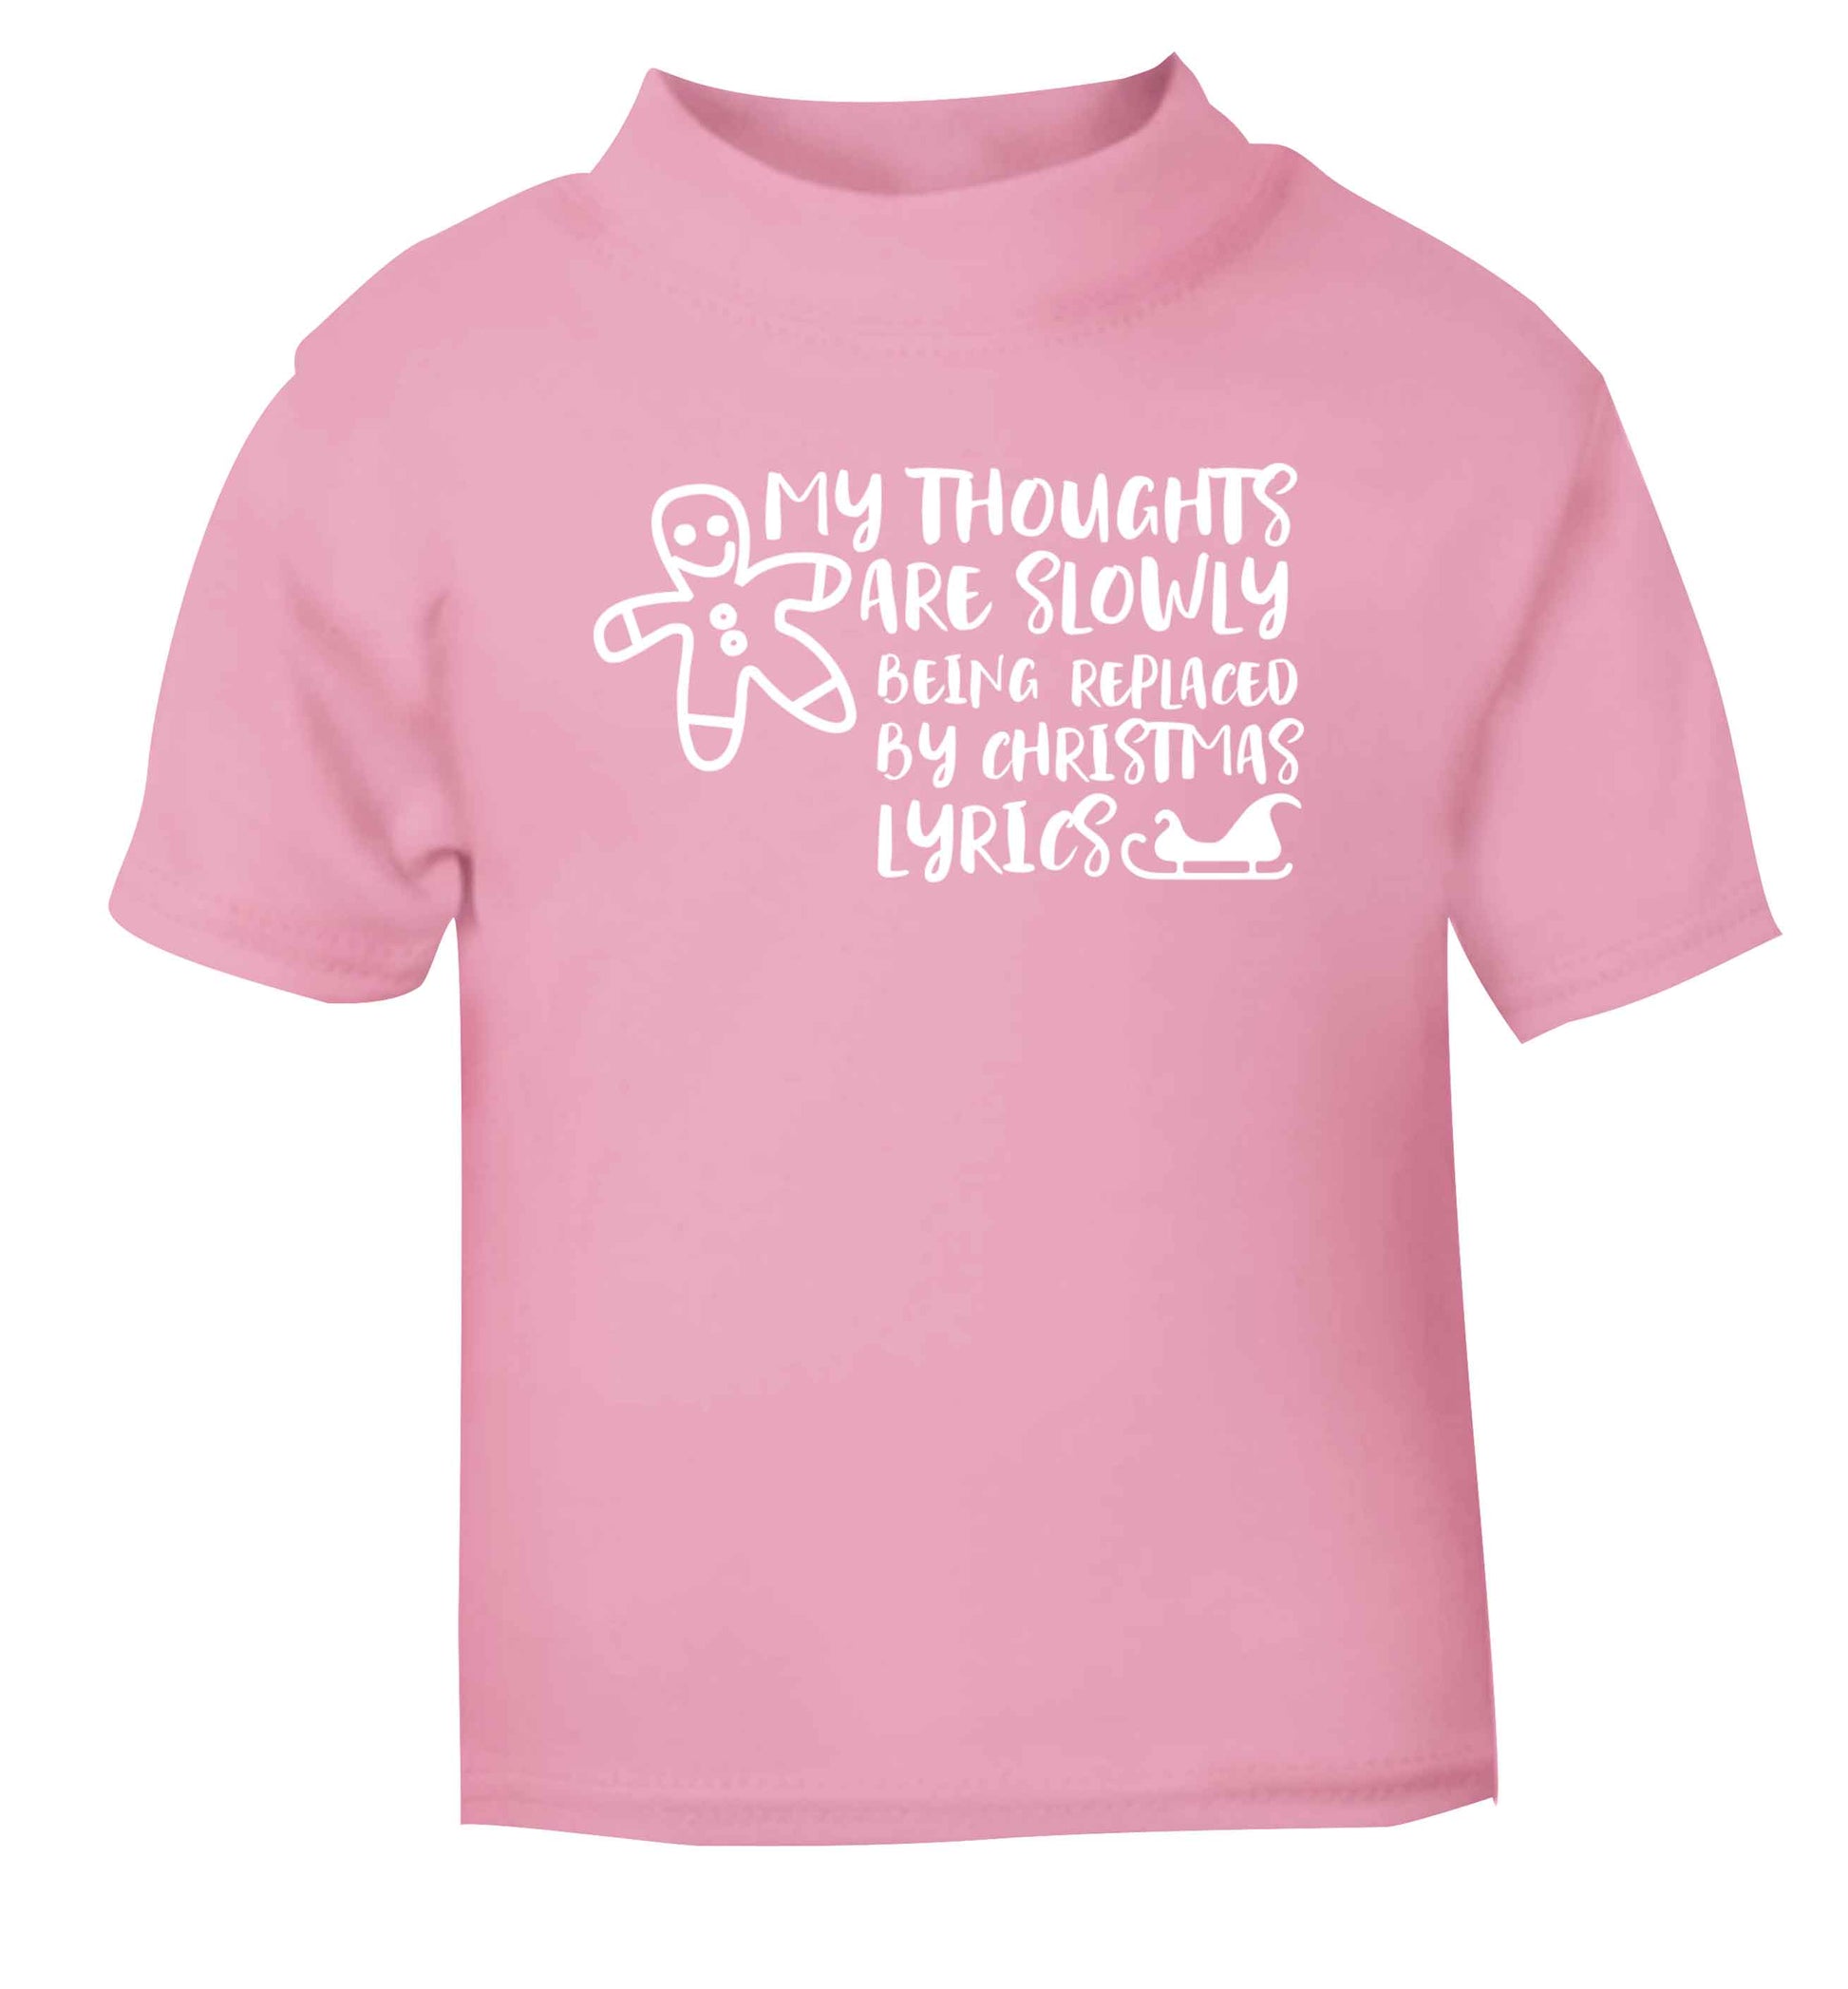 My thoughts are slowly being replaced by Christmas lyrics light pink Baby Toddler Tshirt 2 Years